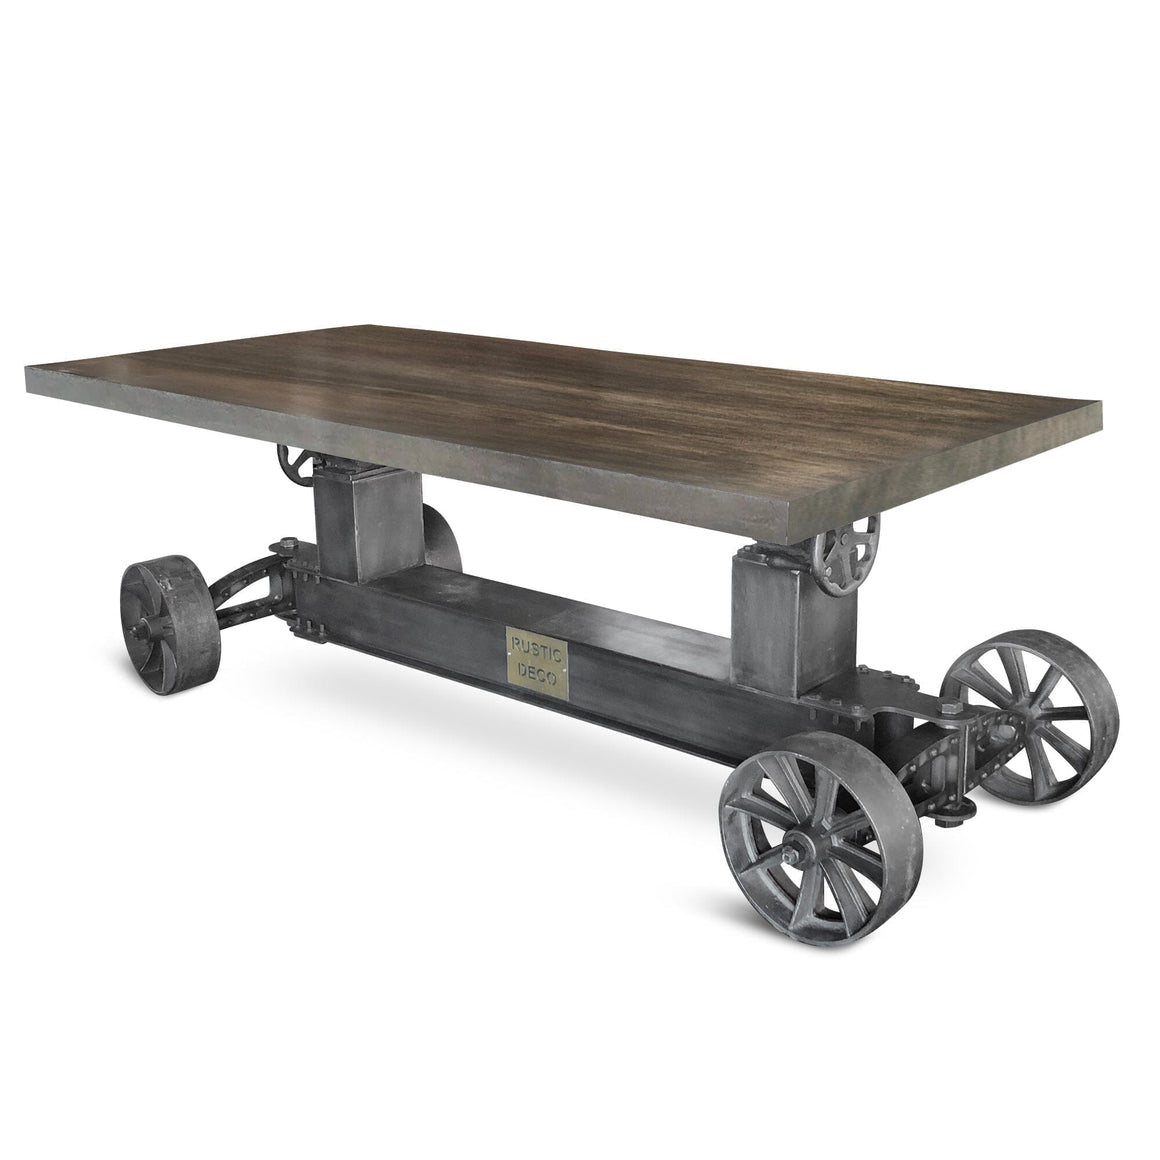 Industrial Trolley Dining Table - Iron Wheels - Adjustable Crank - Gray Top - Rustic Deco Incorporated